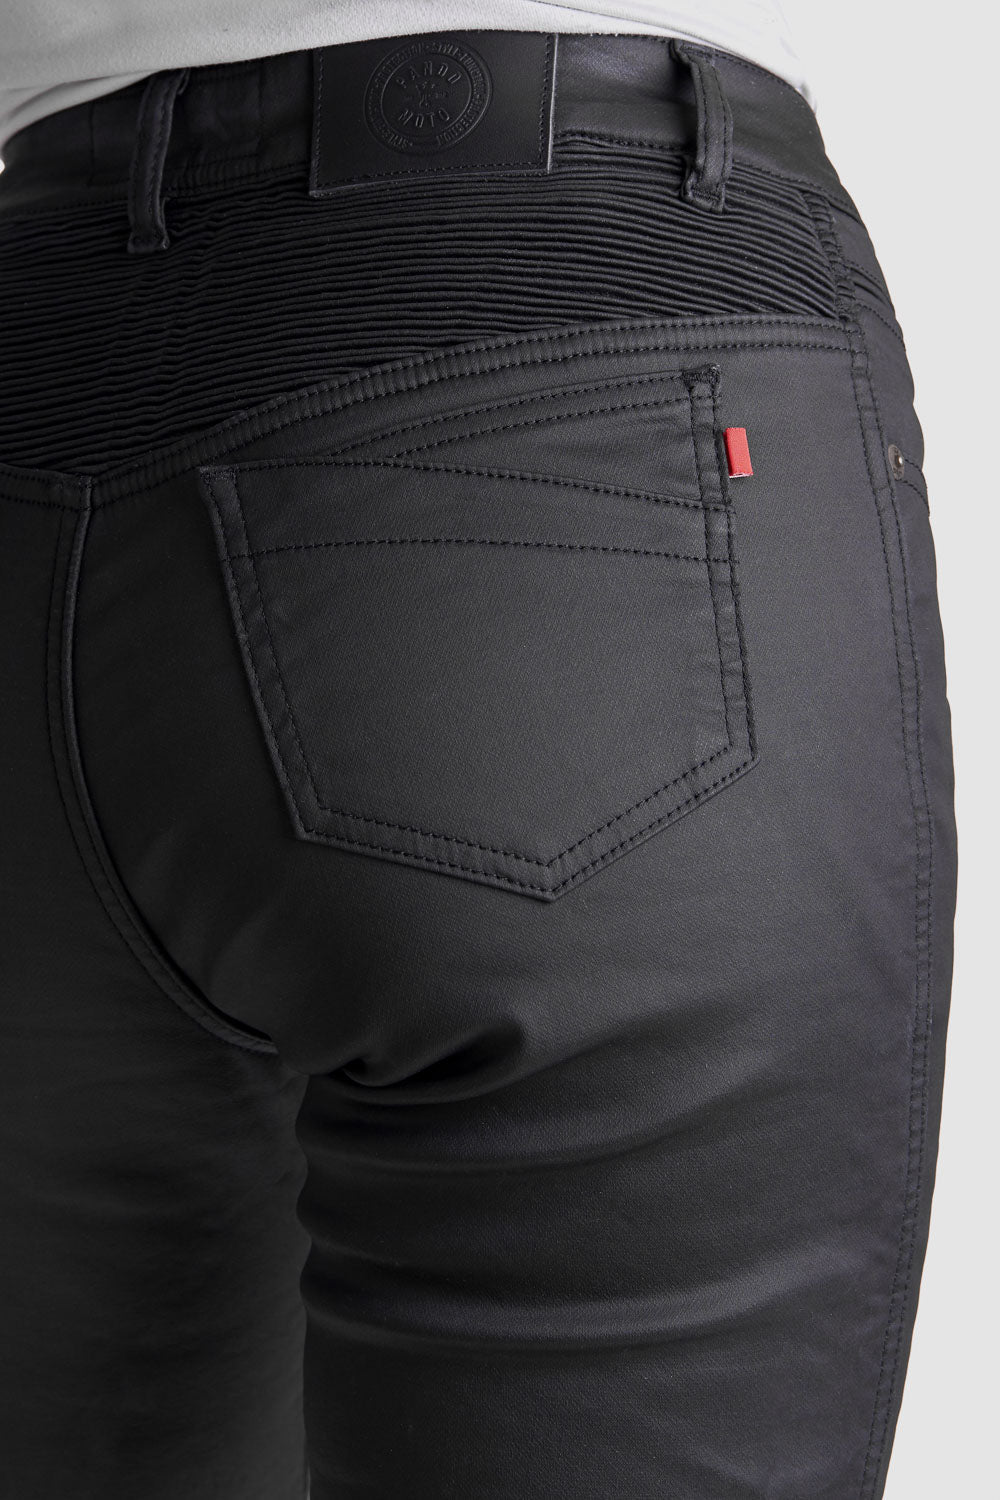 The bottom of a woman wearing women&#39;s black motorcycle jeans Lorica Kevlar from Pando Moto